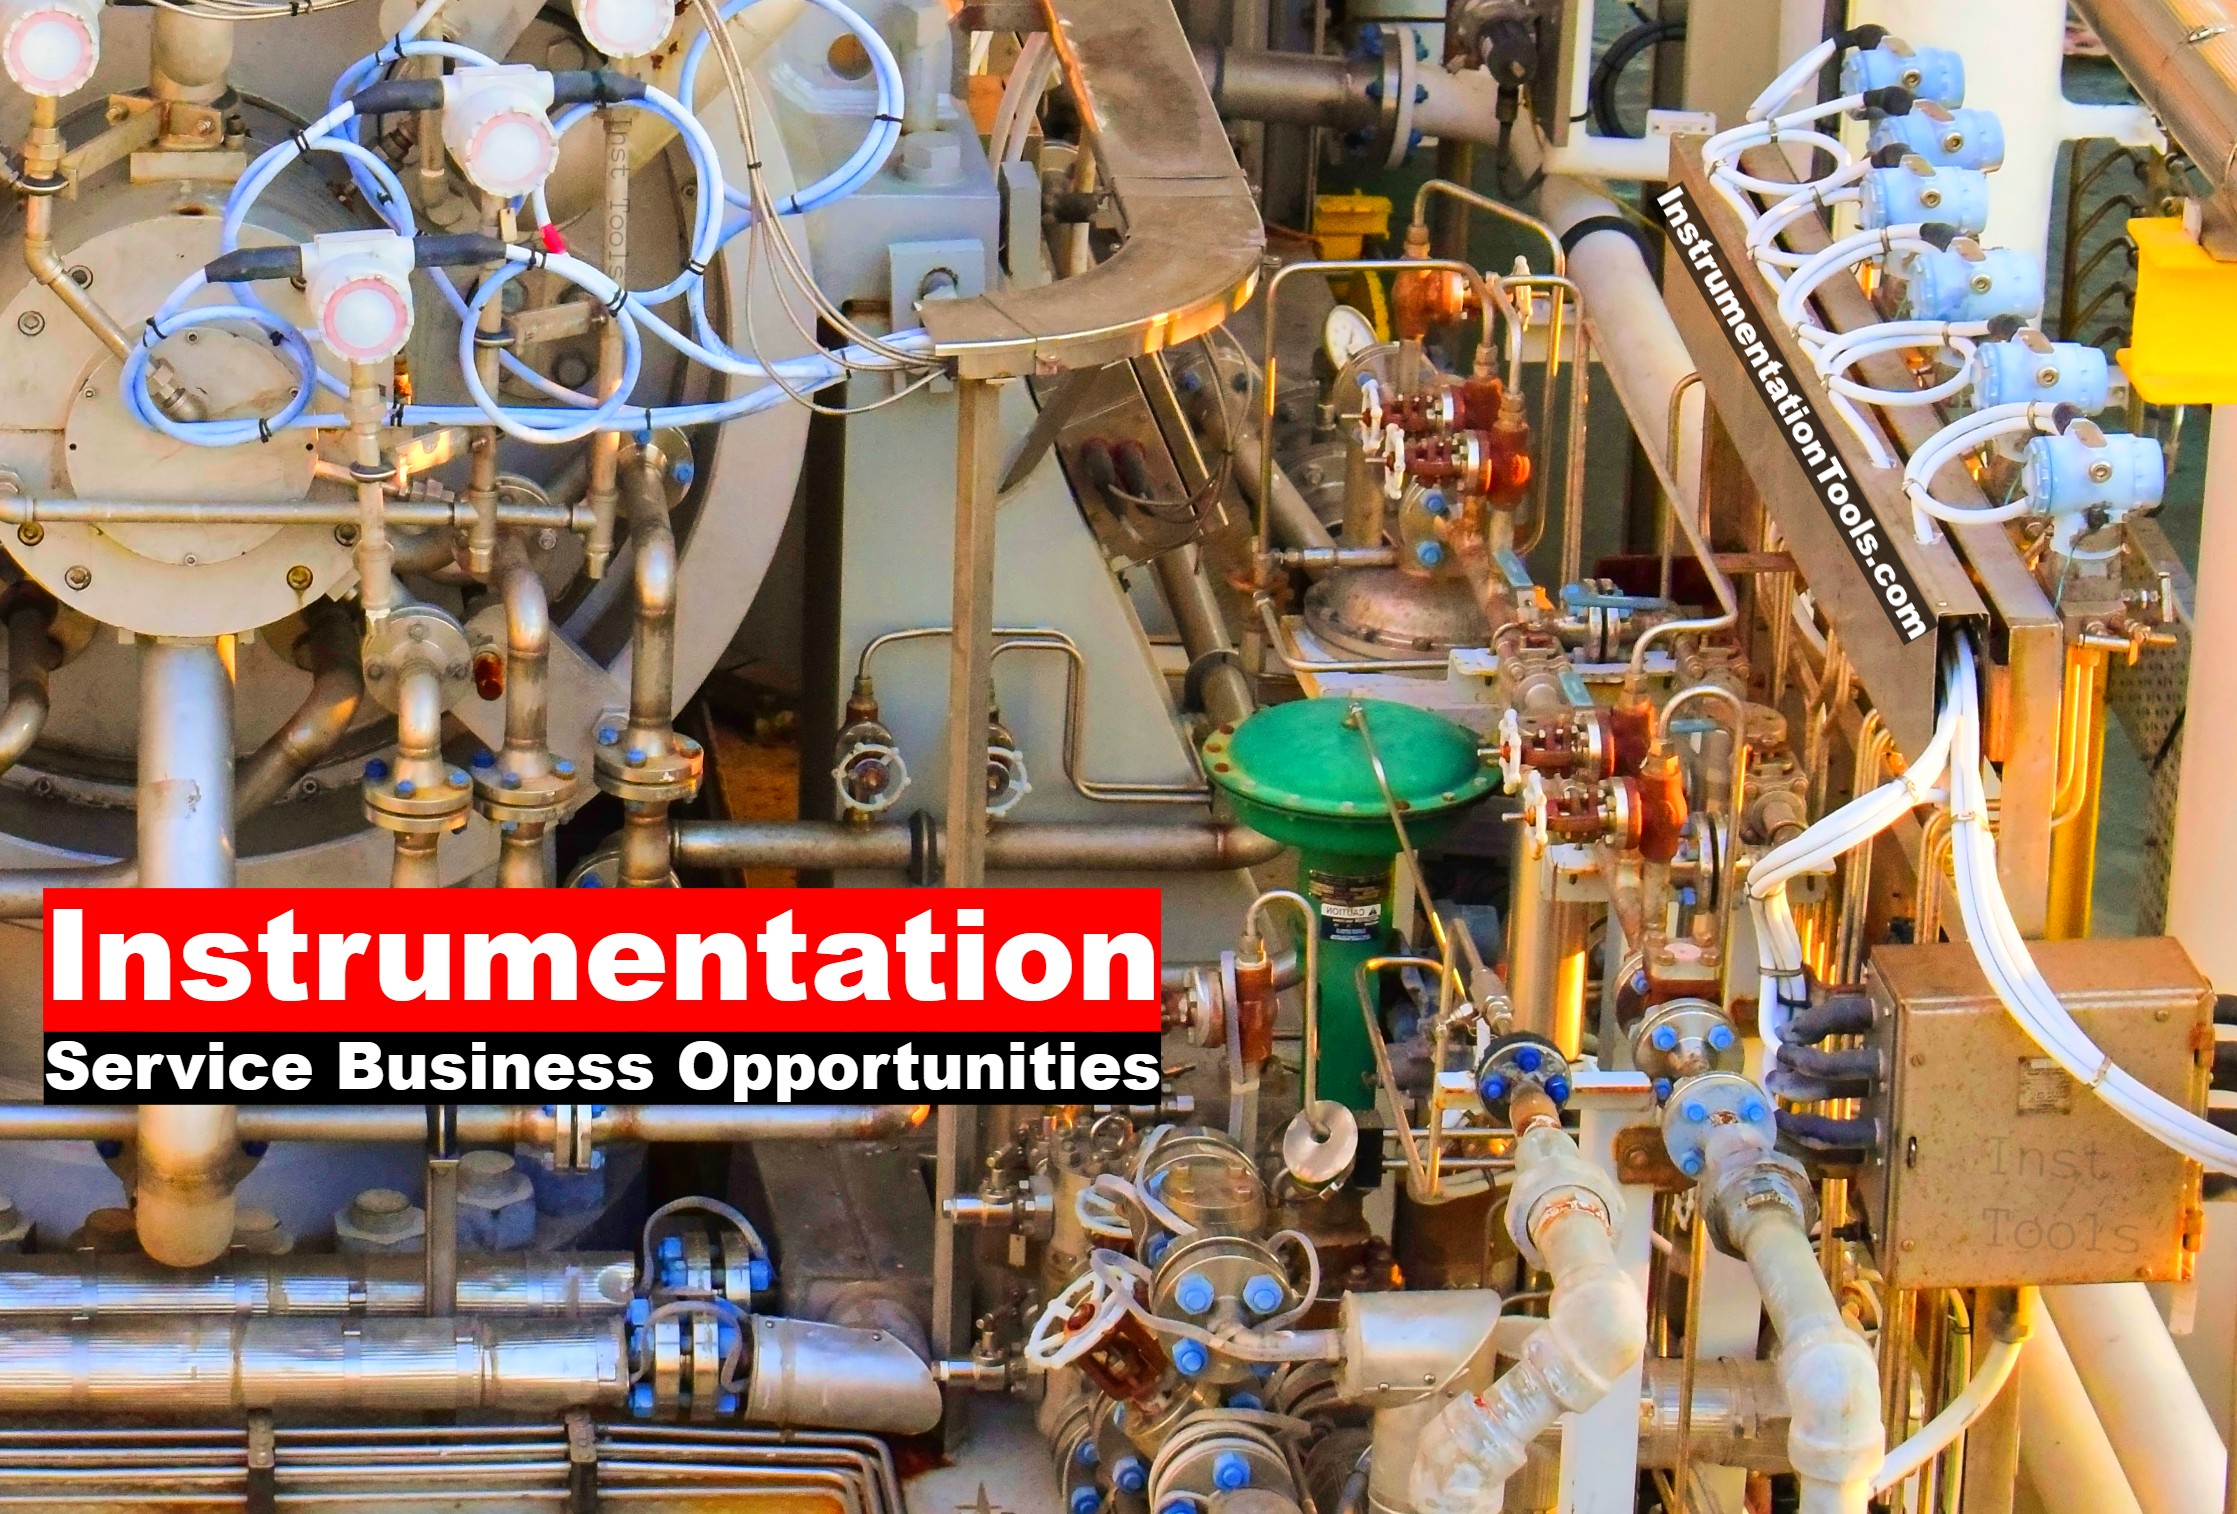 Top 20 Instrumentation Service Business Opportunities in the Industry